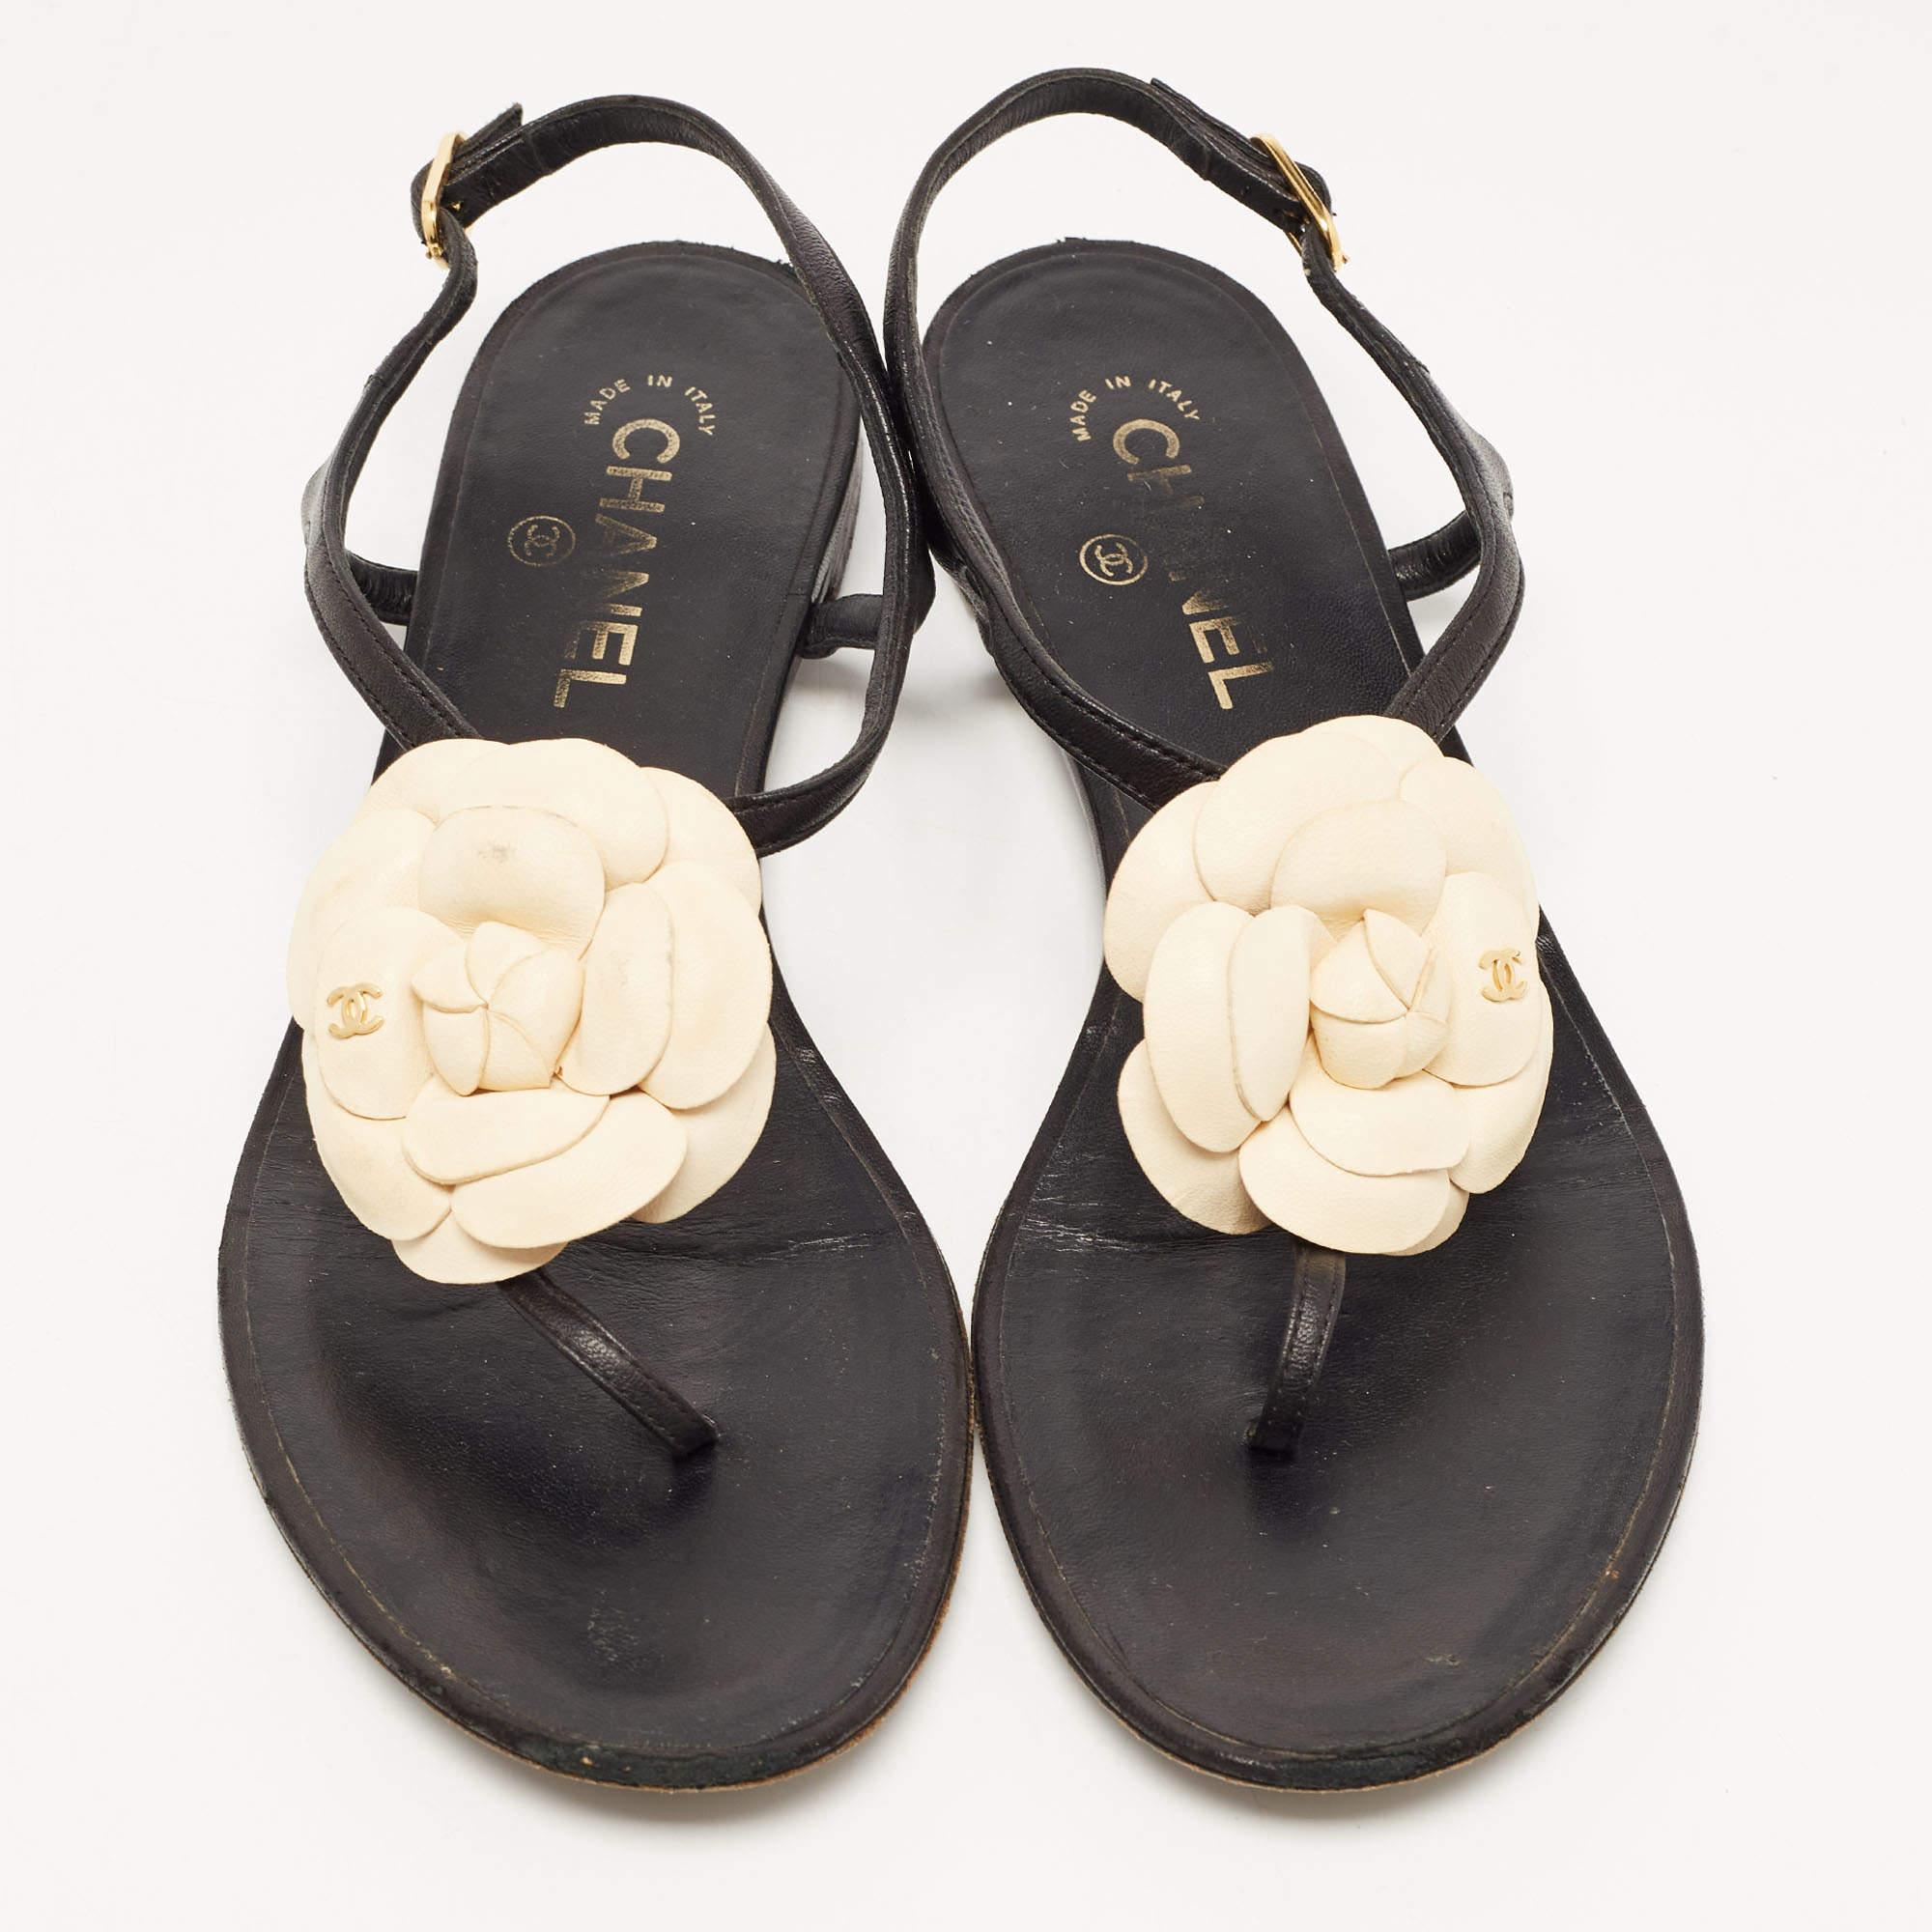 CHANEL FLOWER CAMELLIA CHARM BLACK LEATHER FLAT BALLERINA PEARL ANKLE STRAP  35.5